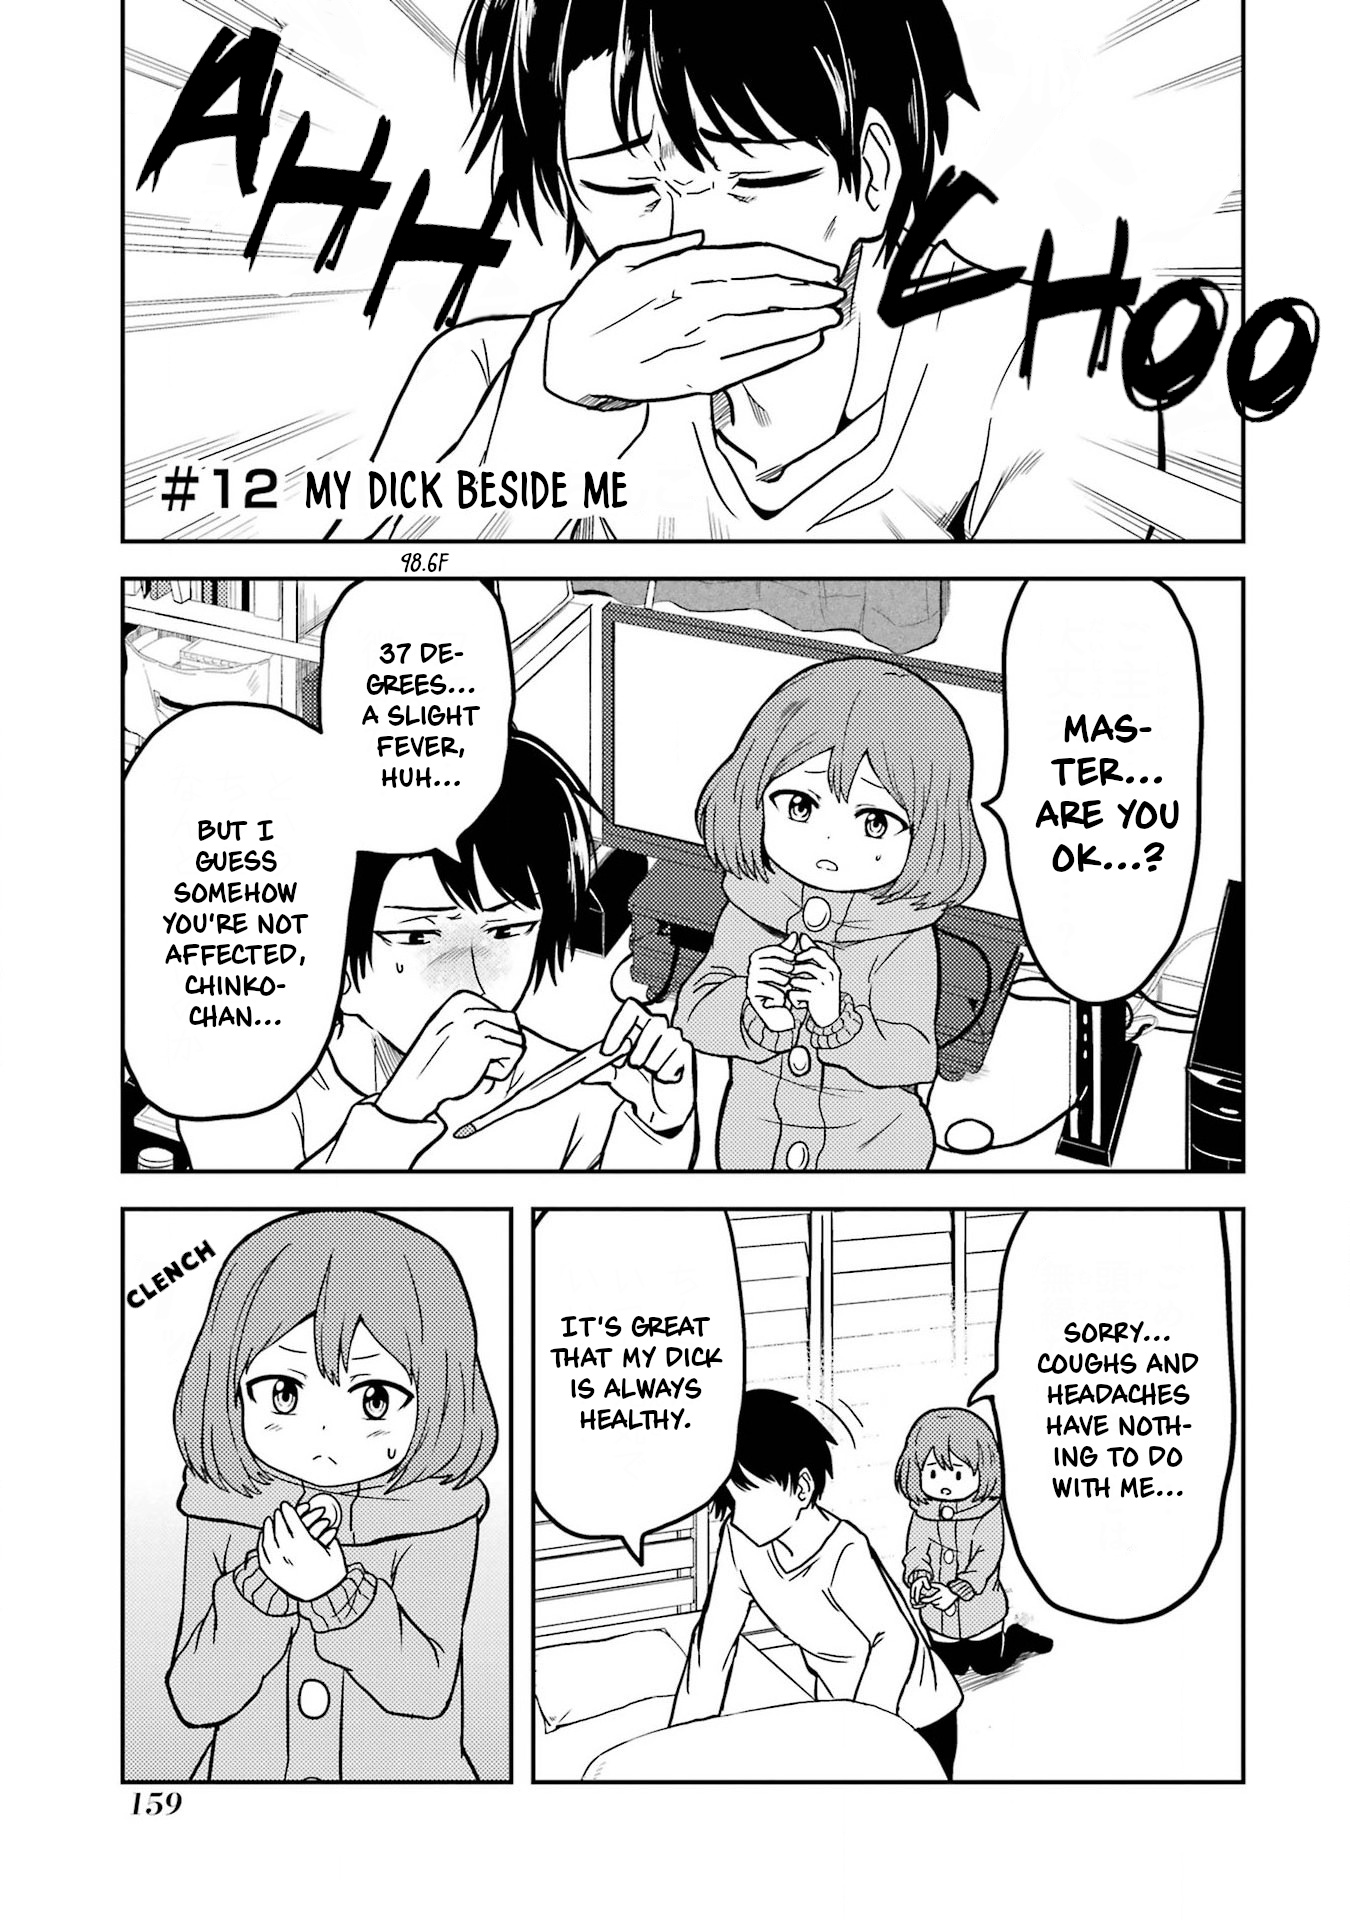 Turns Out My Dick Was A Cute Girl Vol.1 Chapter 12: My Dick Beside Me - Picture 1